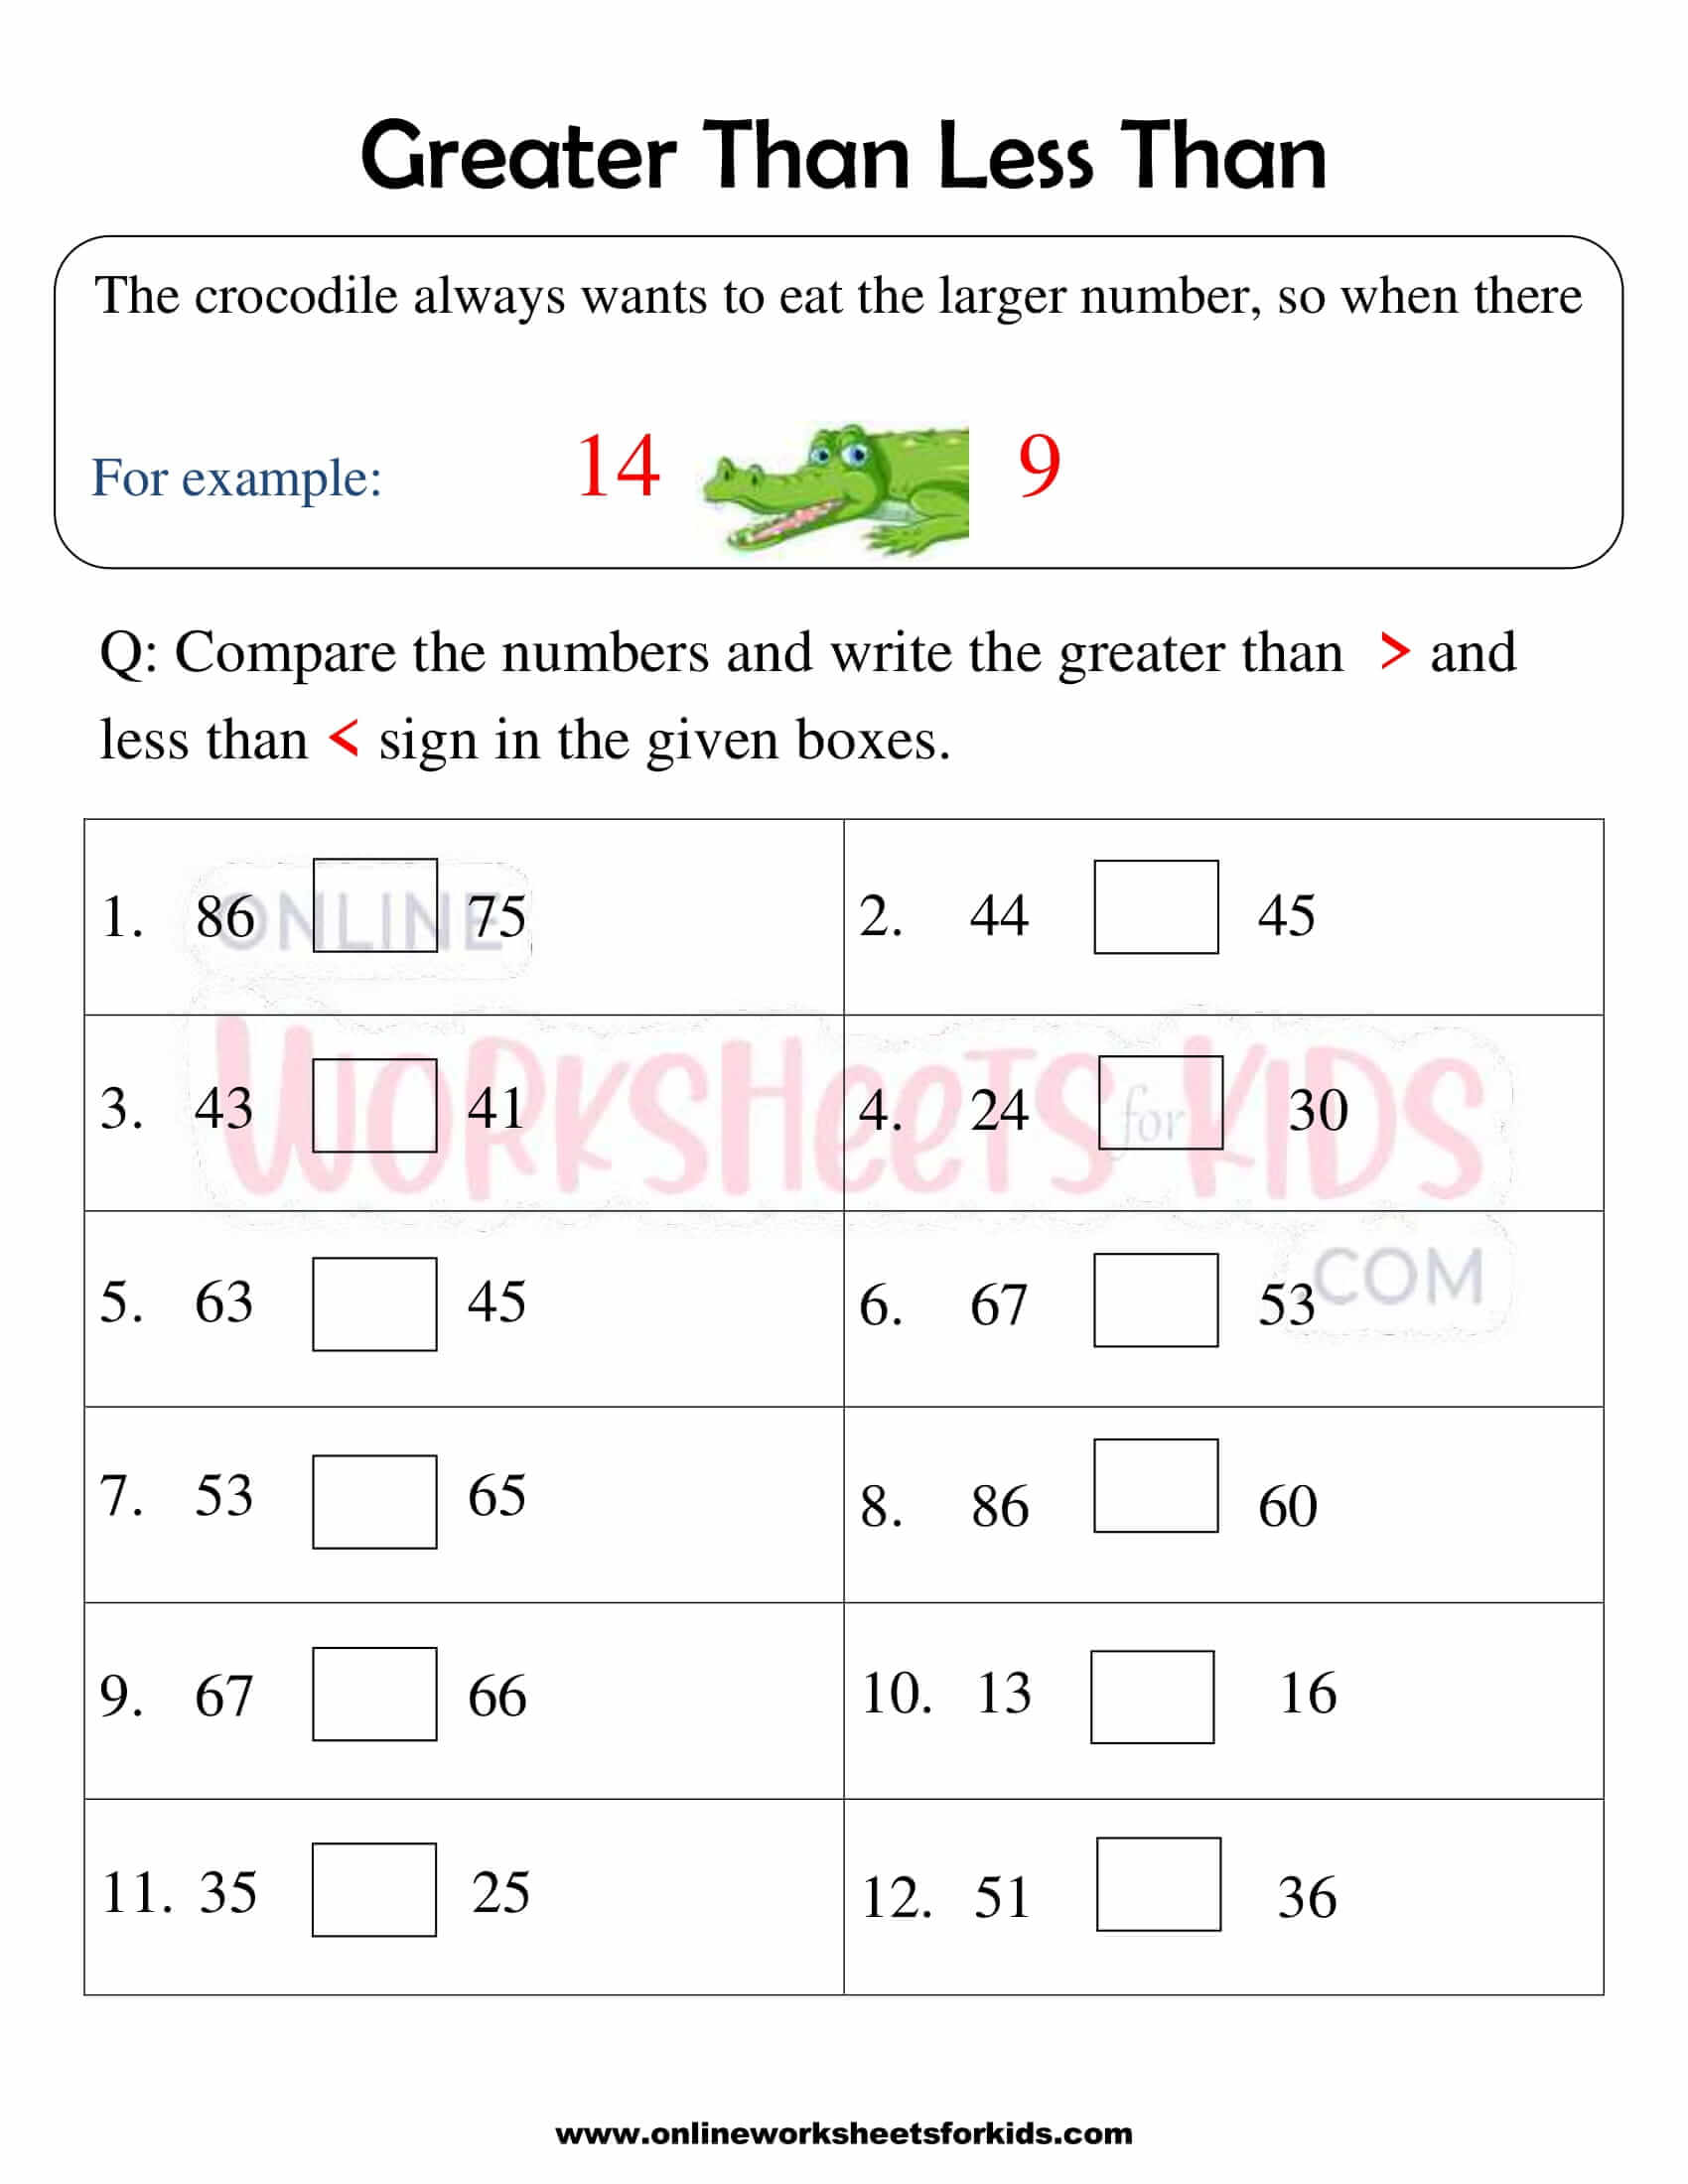 greater-than-less-than-worksheets-first-grade-9